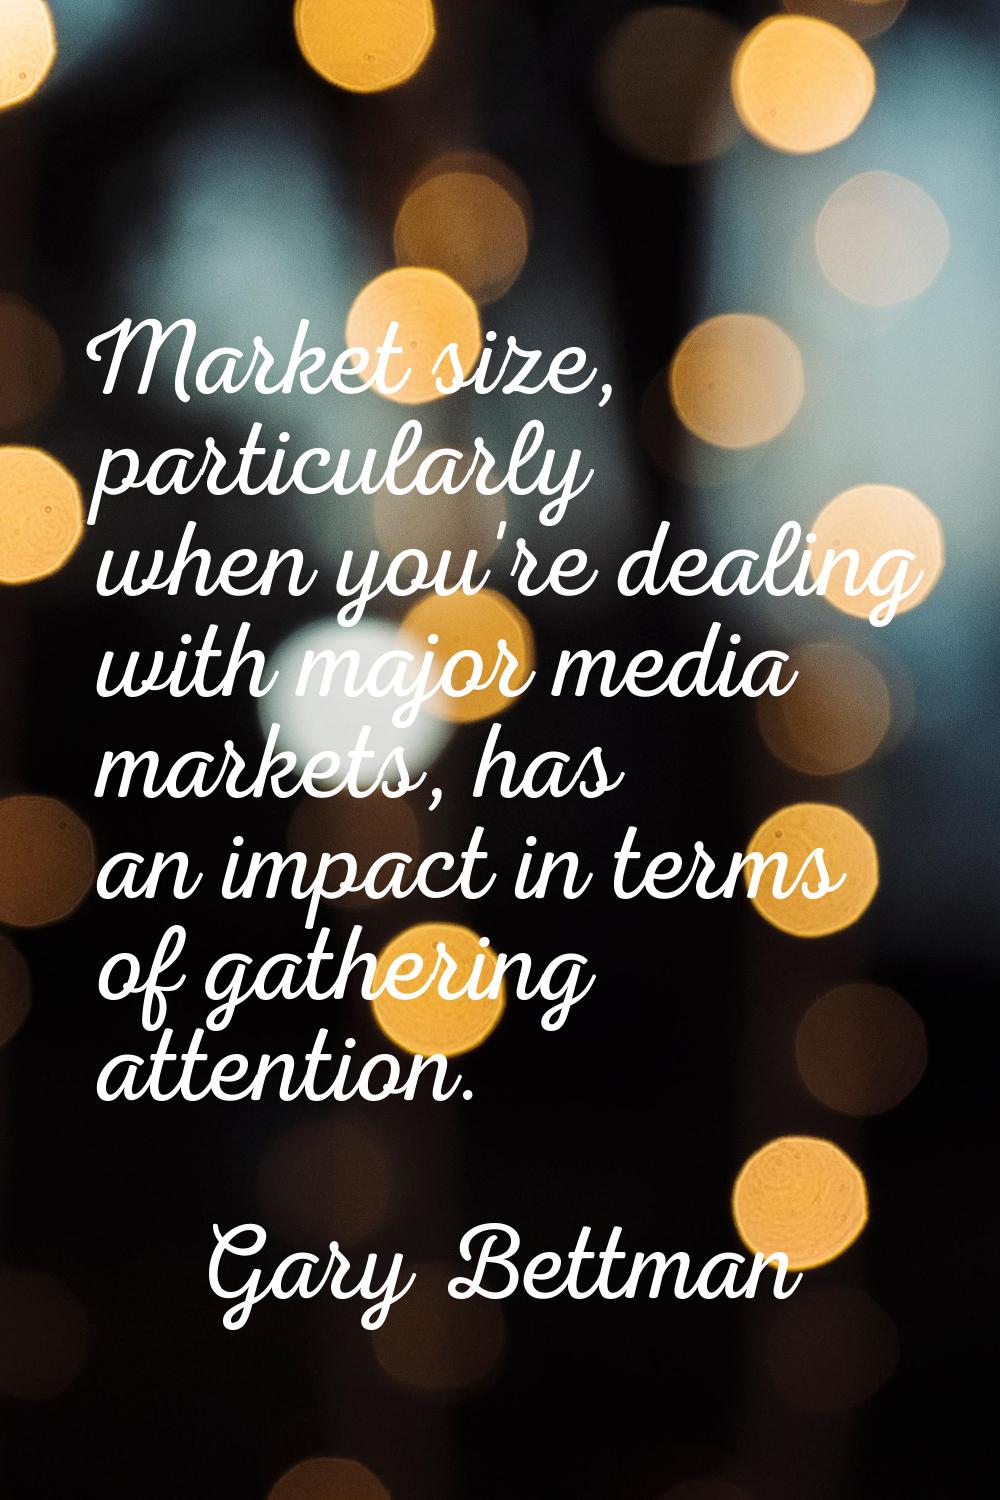 Market size, particularly when you're dealing with major media markets, has an impact in terms of g